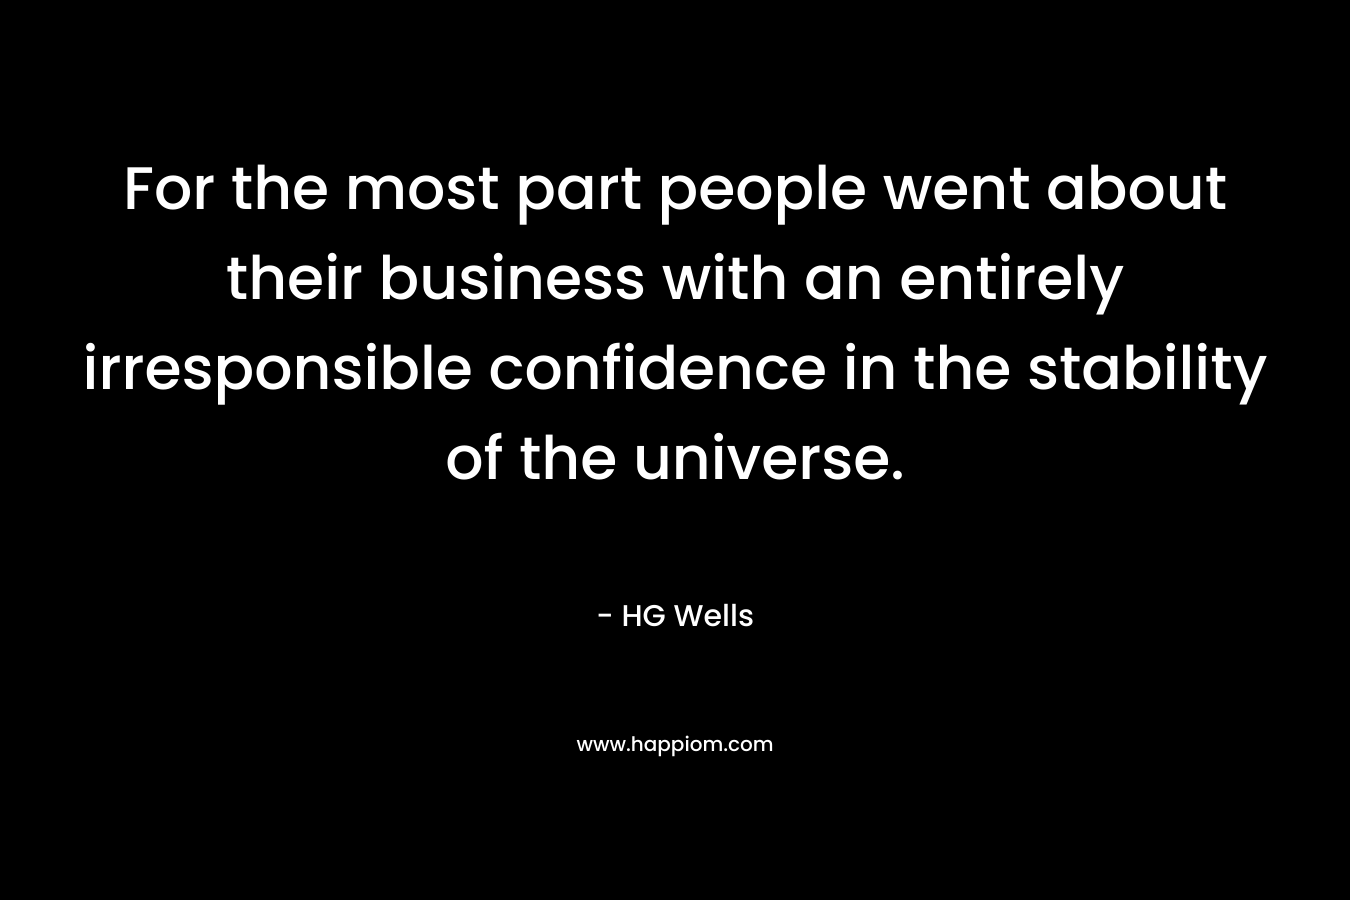 For the most part people went about their business with an entirely irresponsible confidence in the stability of the universe. – HG Wells